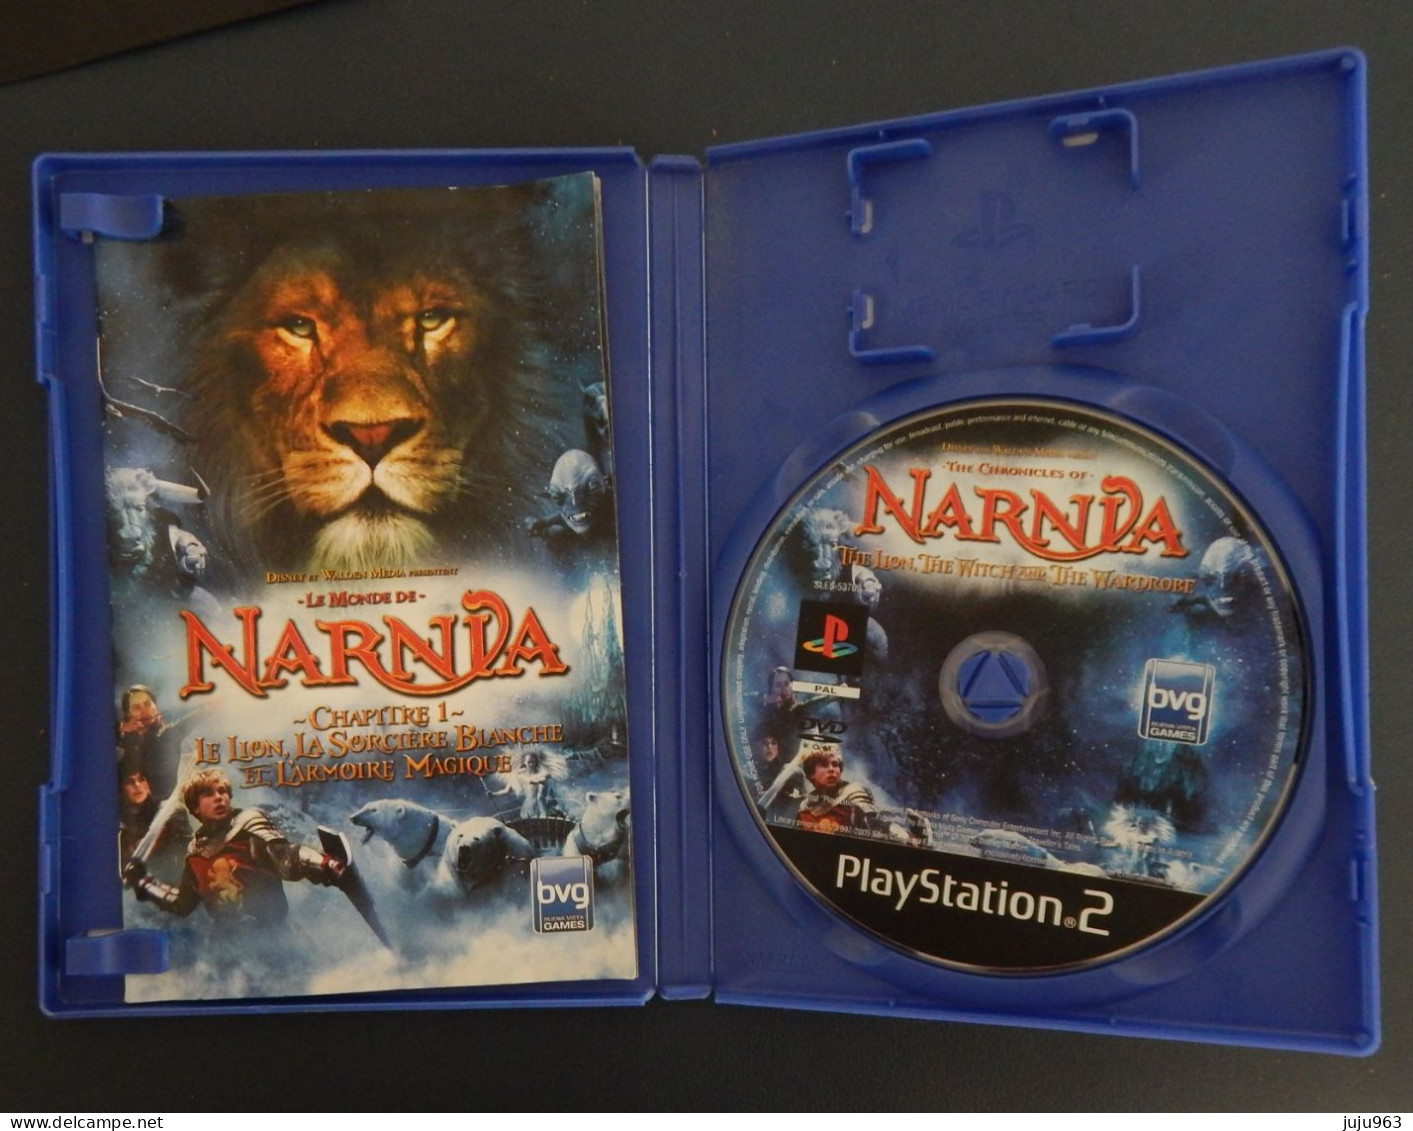 SONY PLAYSTATION 2 "NARNIA" VOIR 2 SCANS OCCASION - Playstation 2